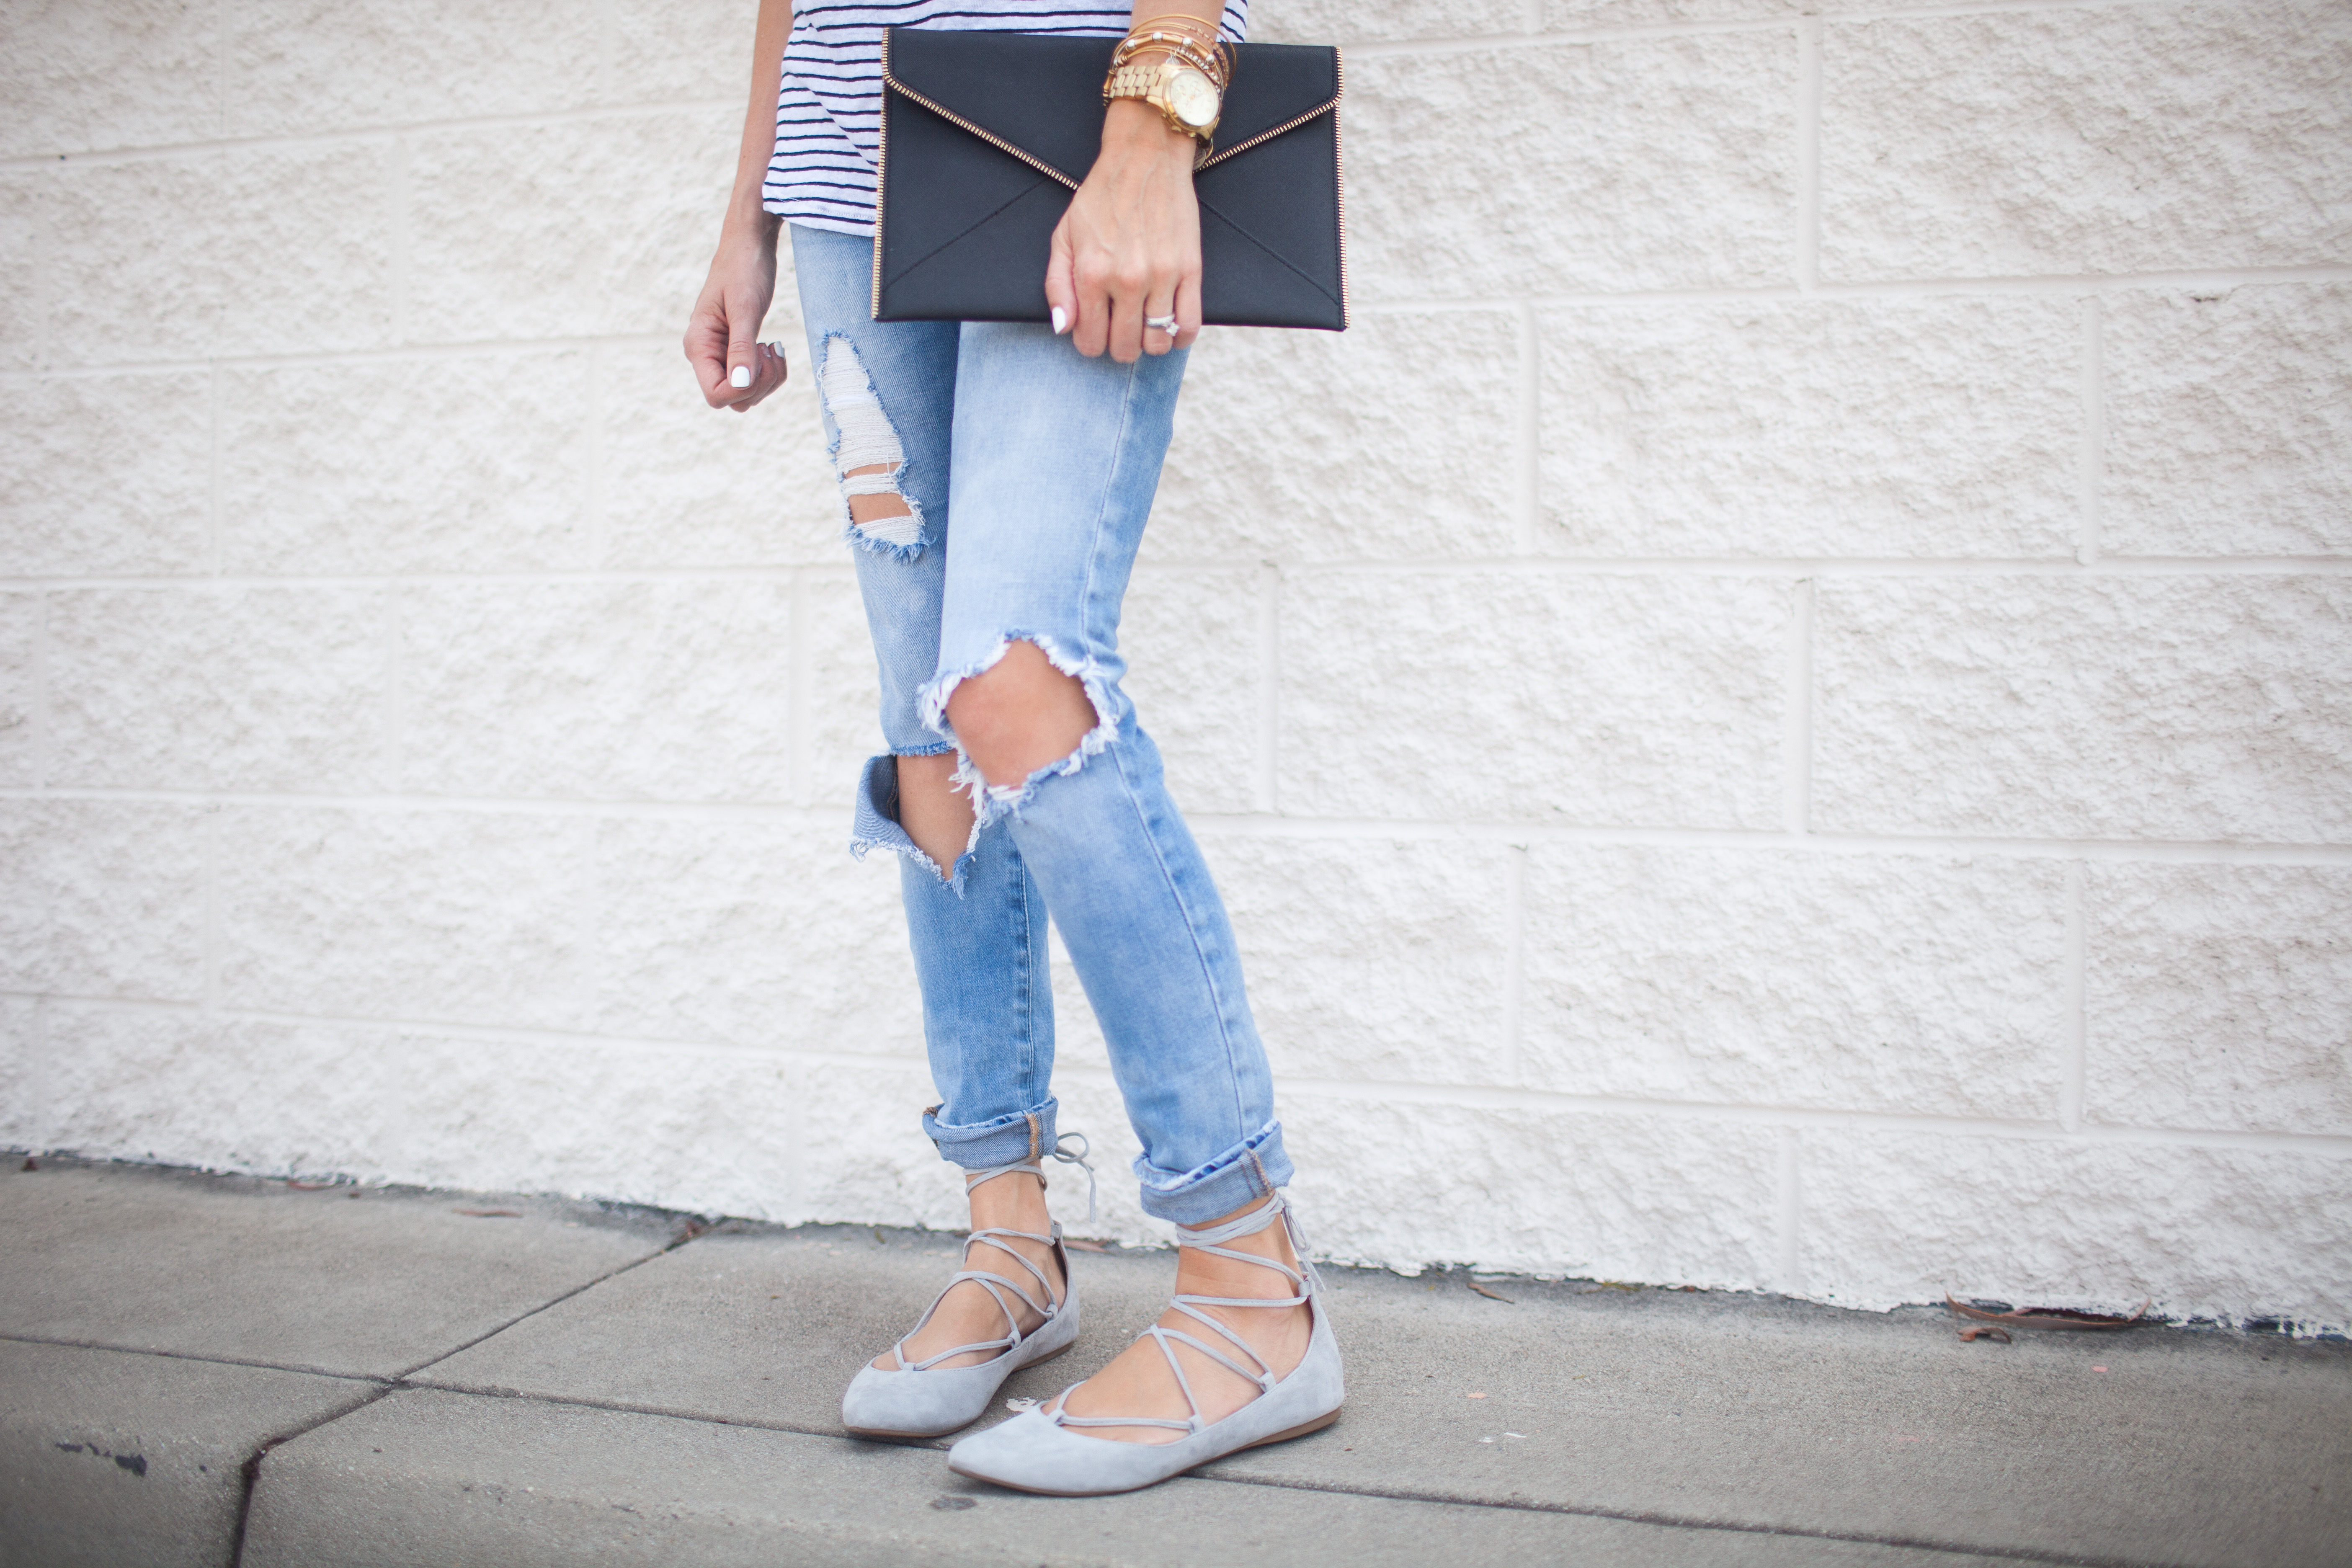 stave-madden-grey-lace-up-flats